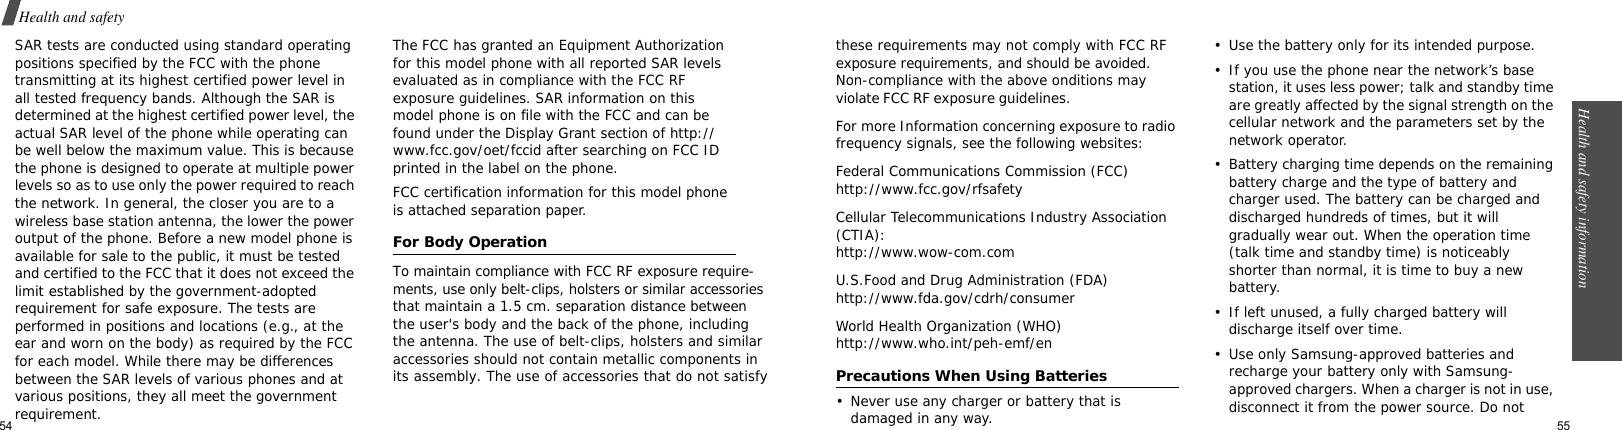 54Health and safety SAR tests are conducted using standard operating positions specified by the FCC with the phone transmitting at its highest certified power level in all tested frequency bands. Although the SAR is determined at the highest certified power level, the actual SAR level of the phone while operating can be well below the maximum value. This is because the phone is designed to operate at multiple power levels so as to use only the power required to reach the network. In general, the closer you are to a wireless base station antenna, the lower the power           output of the phone. Before a new model phone is available for sale to the public, it must be tested and certified to the FCC that it does not exceed the limit established by the government-adopted requirement for safe exposure. The tests are performed in positions and locations (e.g., at the ear and worn on the body) as required by the FCC for each model. While there may be differences between the SAR levels of various phones and at various positions, they all meet the government requirement.The FCC has granted an Equipment Authorization for this model phone with all reported SAR levels evaluated as in compliance with the FCC RF exposure guidelines. SAR information on this model phone is on file with the FCC and can be found under the Display Grant section of http://www.fcc.gov/oet/fccid after searching on FCC ID printed in the label on the phone.FCC certification information for this model phone is attached separation paper.For Body OperationTo maintain compliance with FCC RF exposure require-ments, use only belt-clips, holsters or similar accessories that maintain a 1.5 cm. separation distance between the user&apos;s body and the back of the phone, includingthe antenna. The use of belt-clips, holsters and similar accessories should not contain metallic components inits assembly. The use of accessories that do not satisfyHealth and safety information  55these requirements may not comply with FCC RFexposure requirements, and should be avoided. Non-compliance with the above onditions may violate FCC RF exposure guidelines. For more Information concerning exposure to radio frequency signals, see the following websites:Federal Communications Commission (FCC)http://www.fcc.gov/rfsafetyCellular Telecommunications Industry Association (CTIA):http://www.wow-com.comU.S.Food and Drug Administration (FDA)http://www.fda.gov/cdrh/consumerWorld Health Organization (WHO)http://www.who.int/peh-emf/enPrecautions When Using Batteries• Never use any charger or battery that is damaged in any way.• Use the battery only for its intended purpose.• If you use the phone near the network’s base station, it uses less power; talk and standby time are greatly affected by the signal strength on the cellular network and the parameters set by the network operator.• Battery charging time depends on the remaining battery charge and the type of battery and charger used. The battery can be charged and discharged hundreds of times, but it will gradually wear out. When the operation time (talk time and standby time) is noticeably shorter than normal, it is time to buy a new battery.• If left unused, a fully charged battery will discharge itself over time. • Use only Samsung-approved batteries and recharge your battery only with Samsung-approved chargers. When a charger is not in use, disconnect it from the power source. Do not 